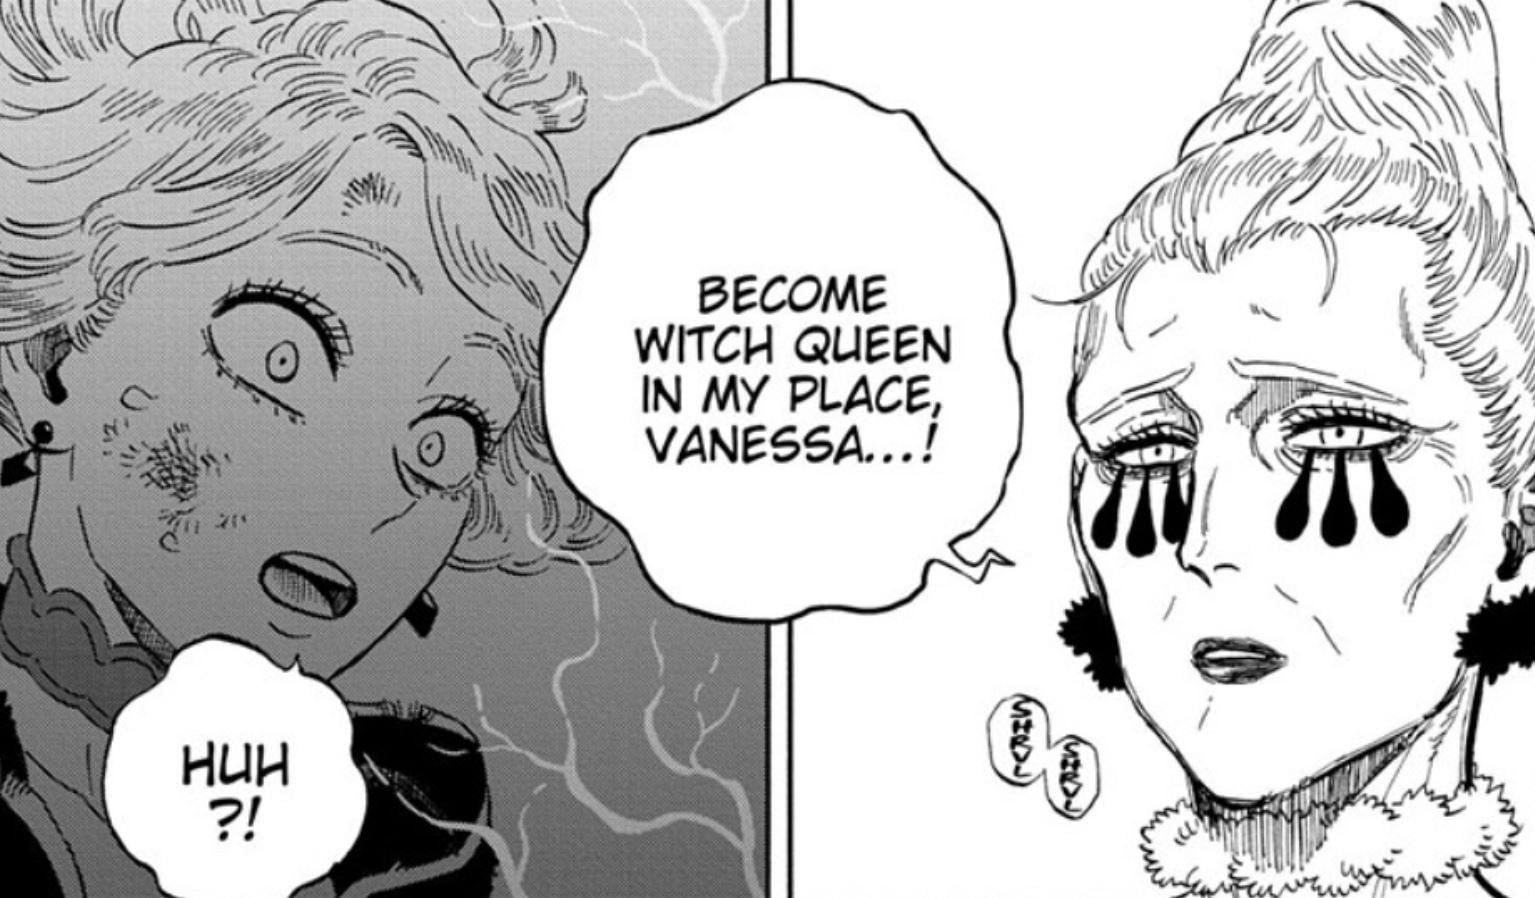 Vanessa and The Witch Queen in the Black Clover manga (Image via Shueisha)